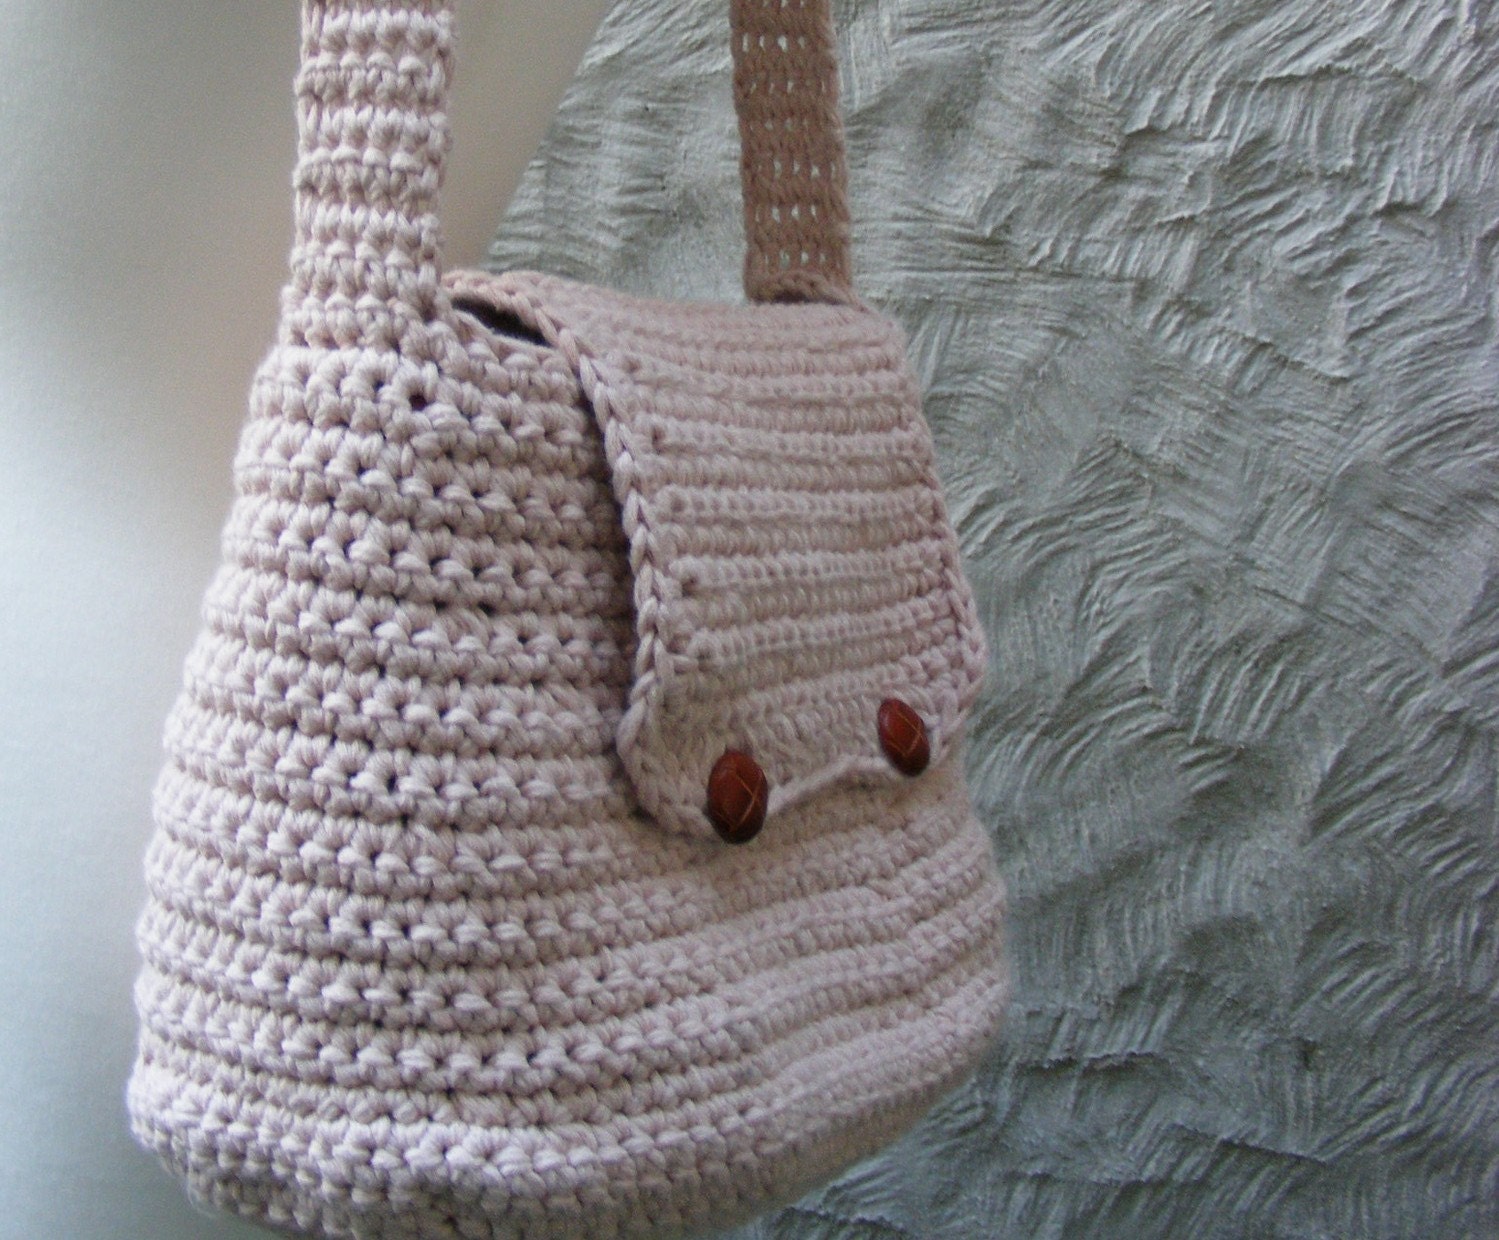 listing is for a crocheted purse pattern the leaf and flower patterns ...